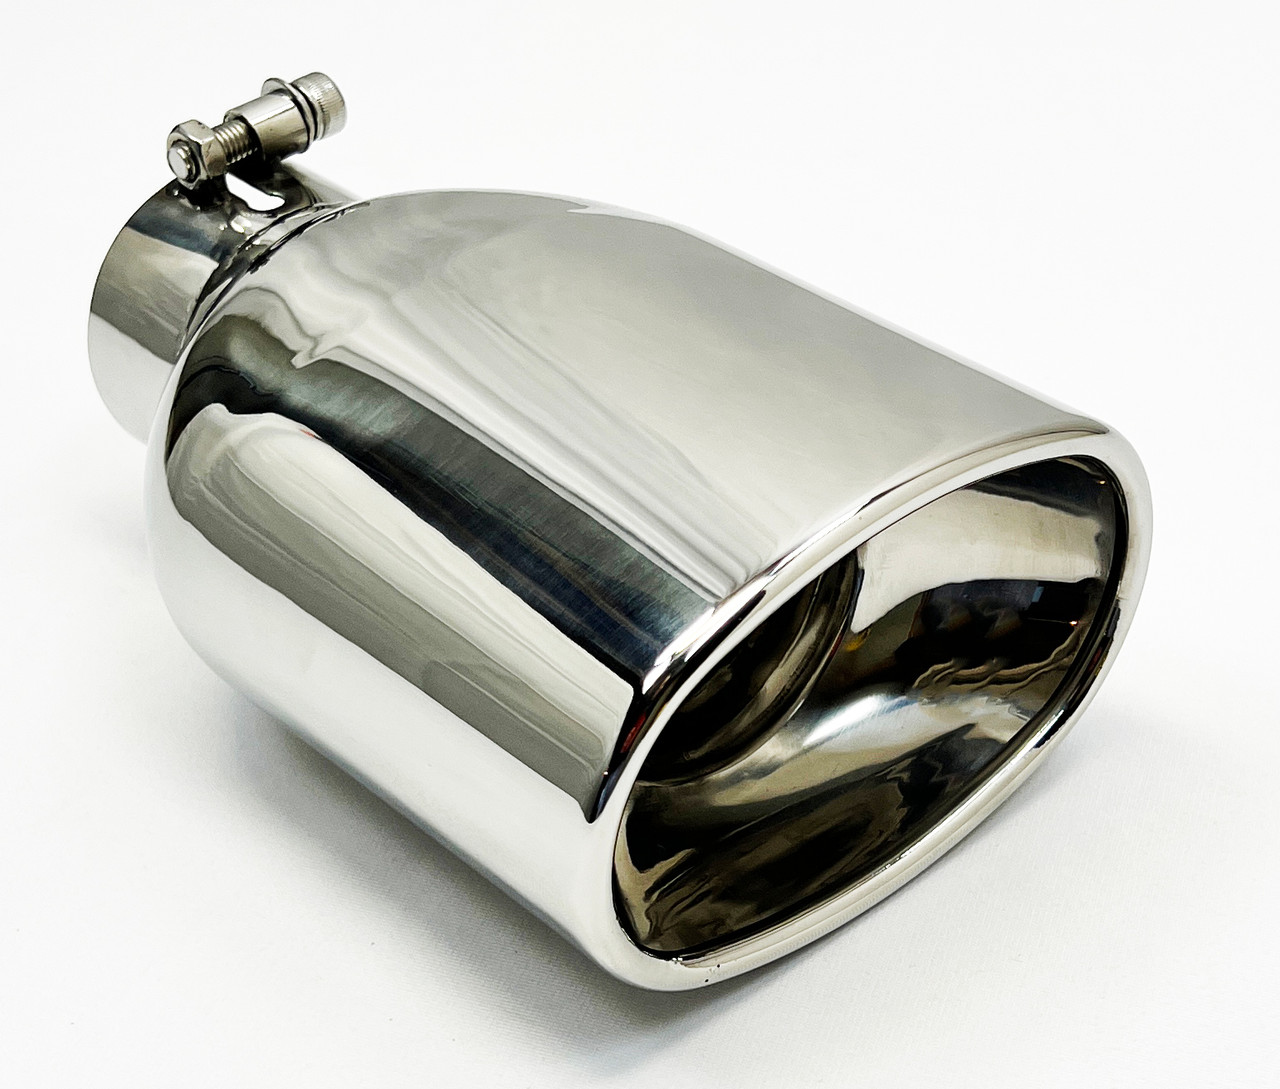 Exhaust Tip 5.50 x 3.5 OD Oval 7.50 Long 2.50 Inlet W550750-250-BOSS-SS Bolt On Double Wall 304 Stainless Steel Resonated Wesdon Exhaust Tip